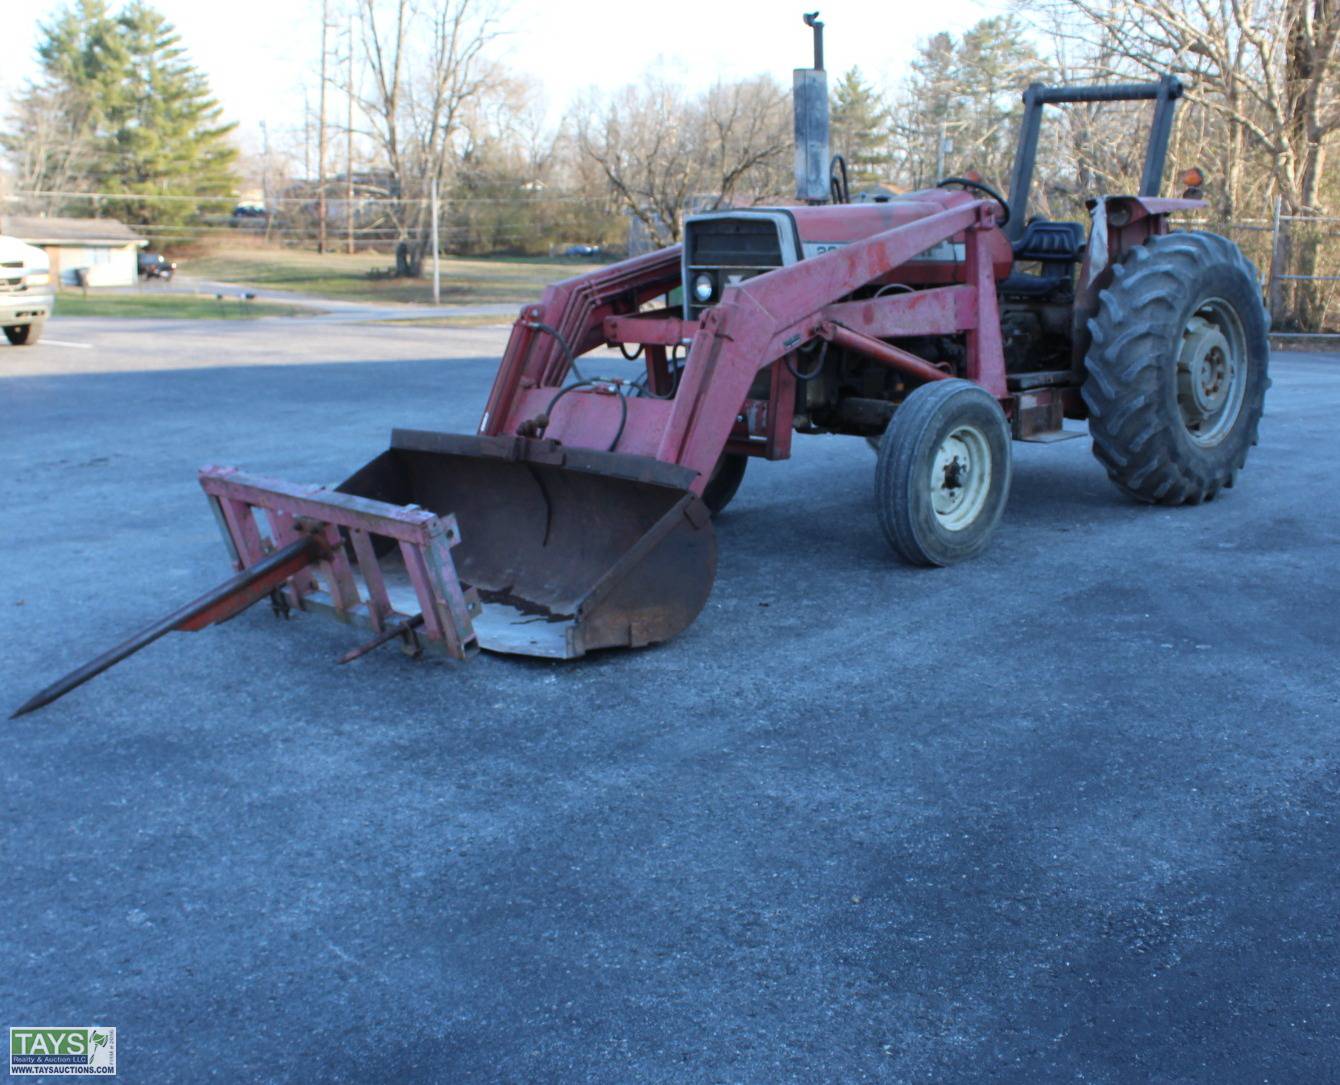 Tays Realty & Auction - Auction: ONLINE ABSOLUTE AUCTION: TRACTORS -  VEHICLES - TRAILERS - SHOP EQUIPMENT ITEM: Sears Air Compressor Paint  Sprayer